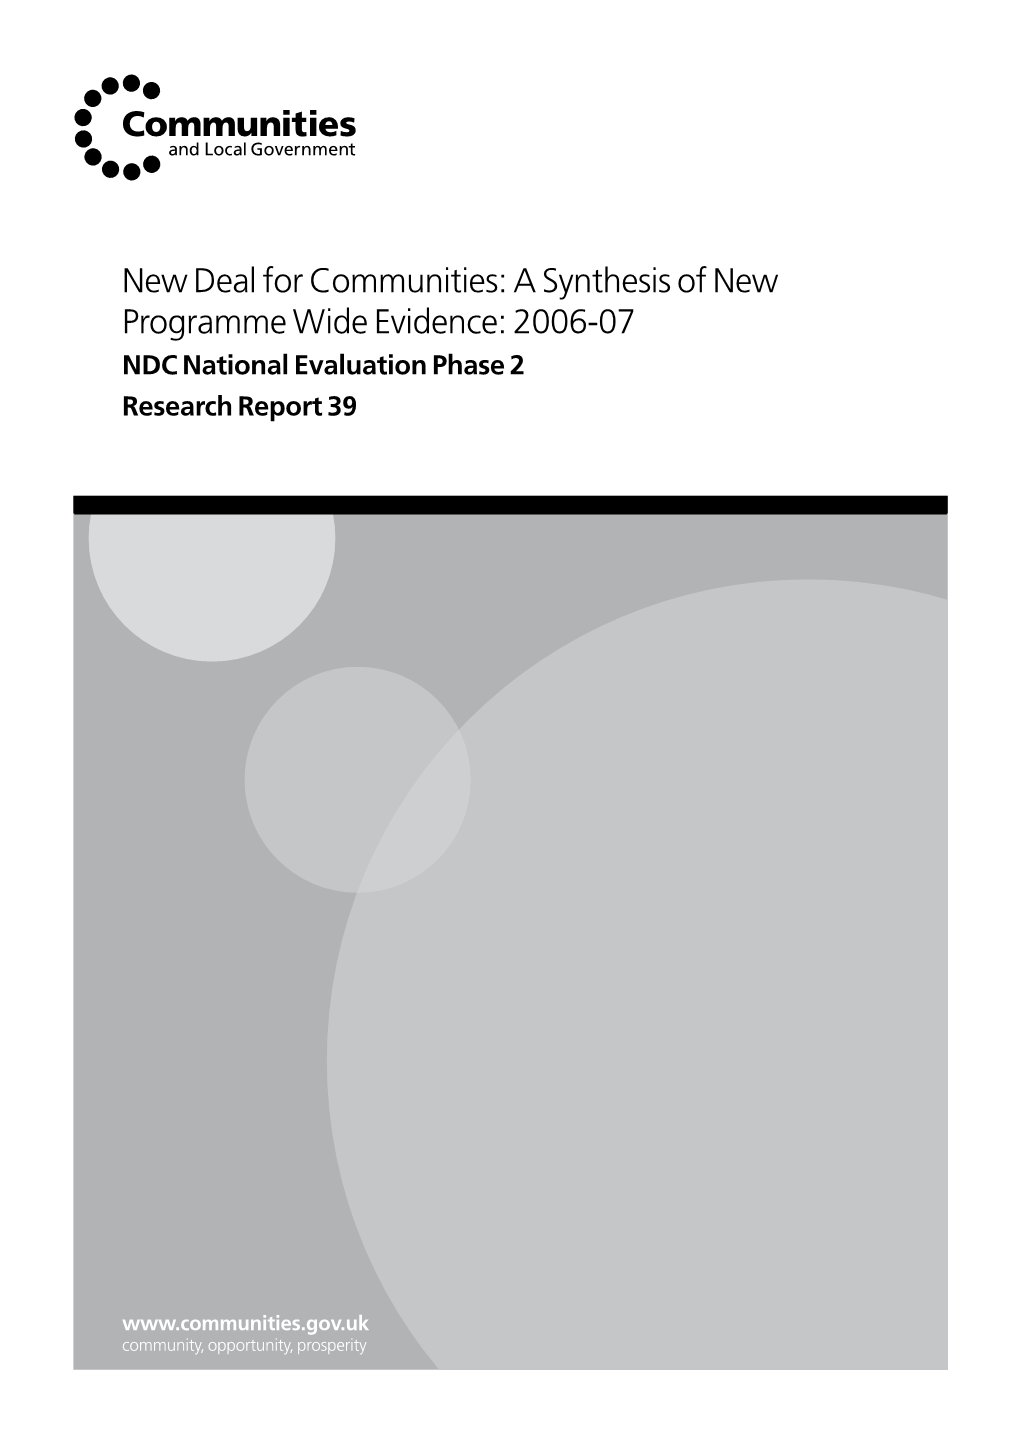 New Deal for Communities: a Synthesis of New Programme Wide Evidence: 2006-07 NDC National Evaluation Phase 2 Research Report 39